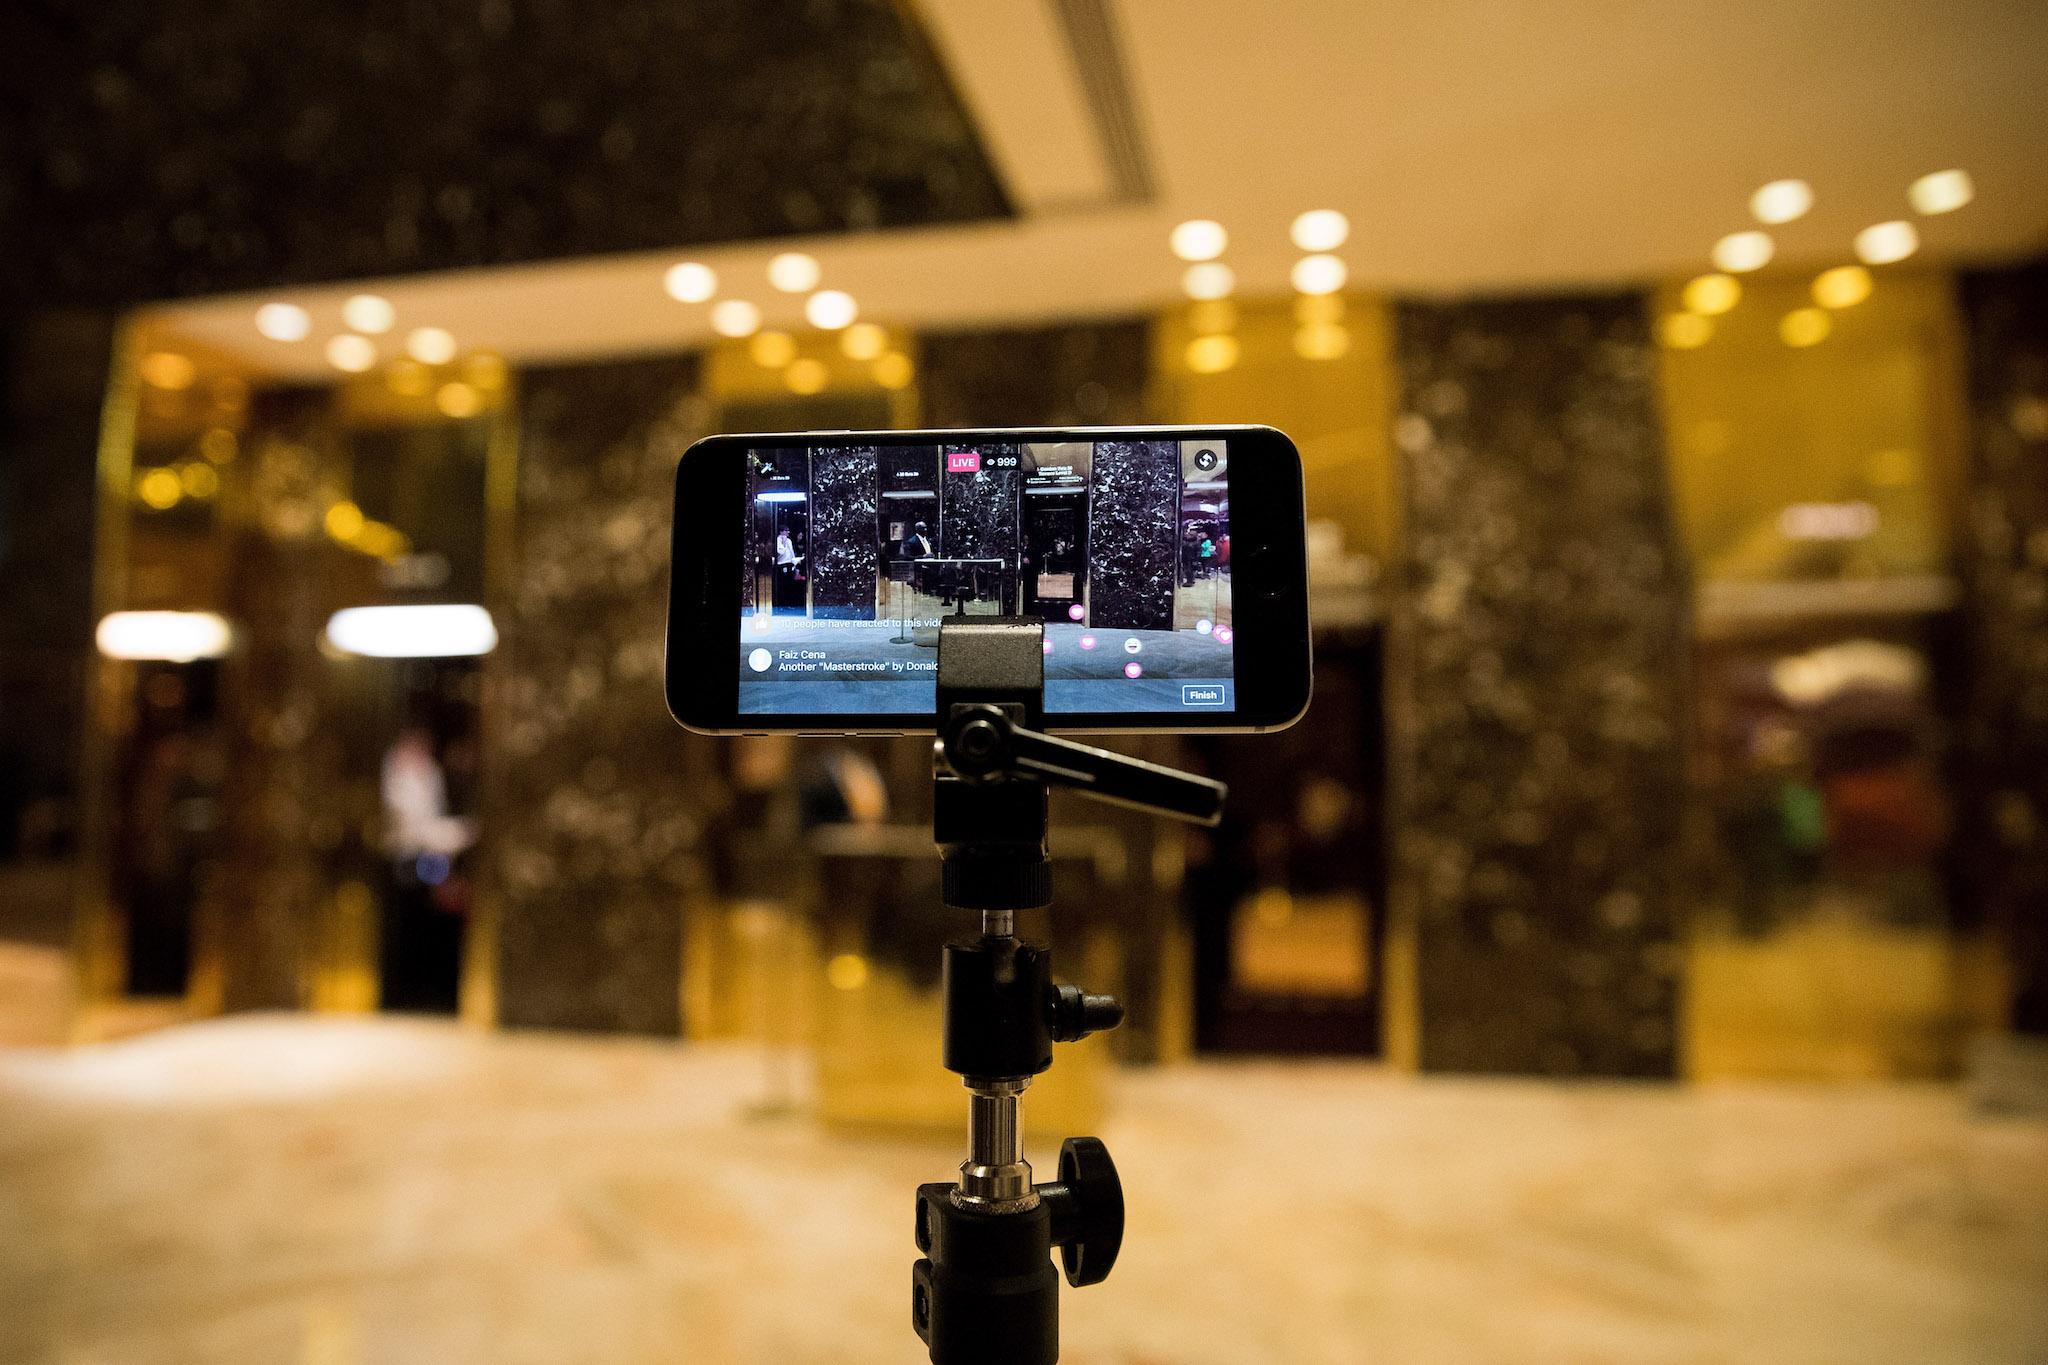 An iPhone streams a 'Facebook Live' live feed of the lobby at Trump Tower, November 29, 2016 in New York City